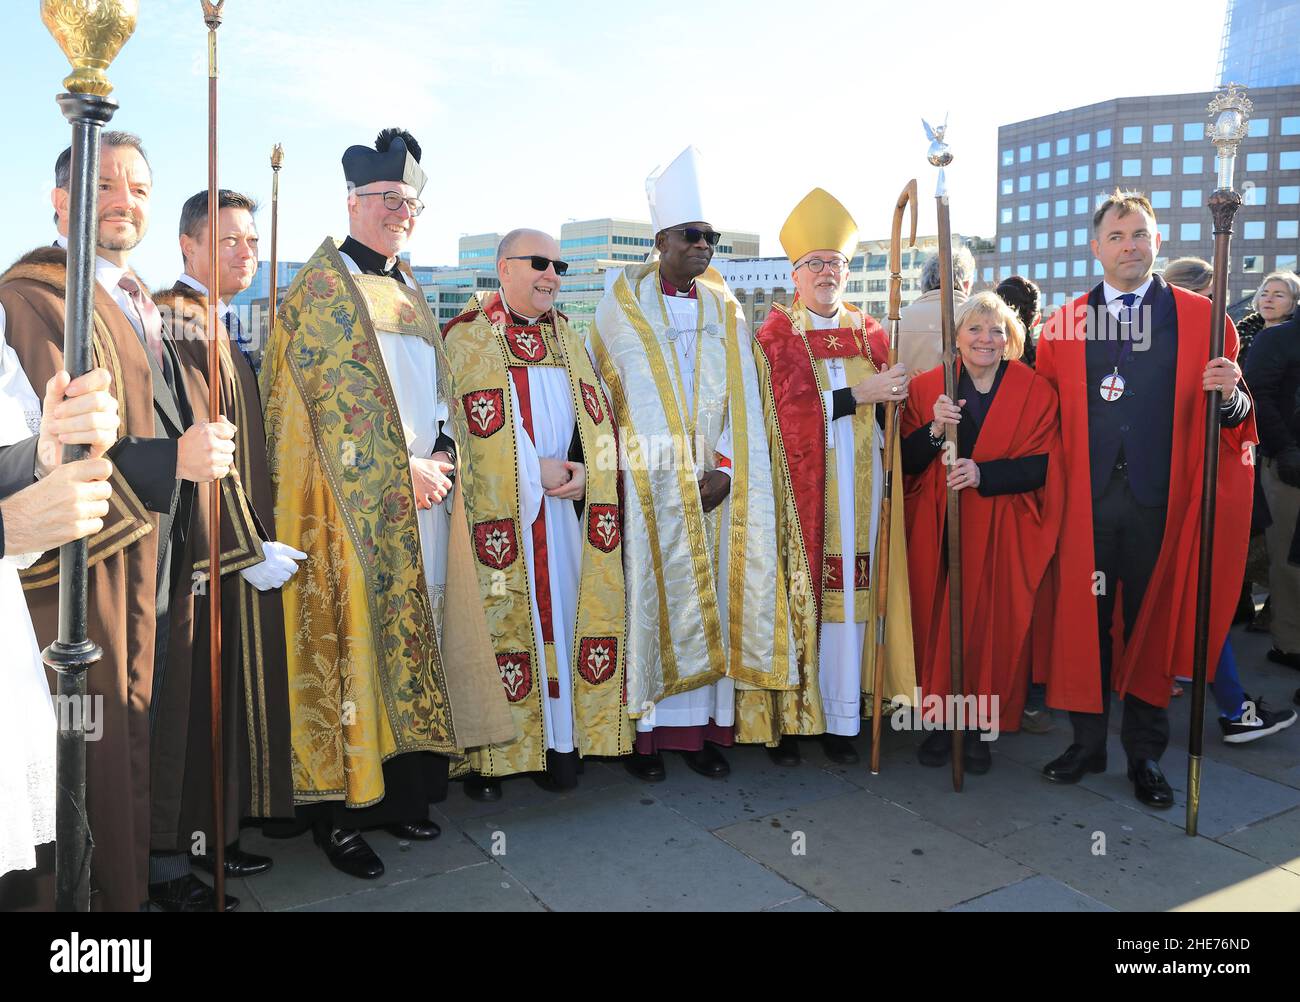 London, UK, January 9th 2022. The Bishop of Southwark Cathedral joined clergy and congregation from St Magnus the Martyr church in a service blessing the Thames and all those who use London's great river. This year they were lucky to have beautiful sunny weather. Monica Wells/Alamy Live News Stock Photo